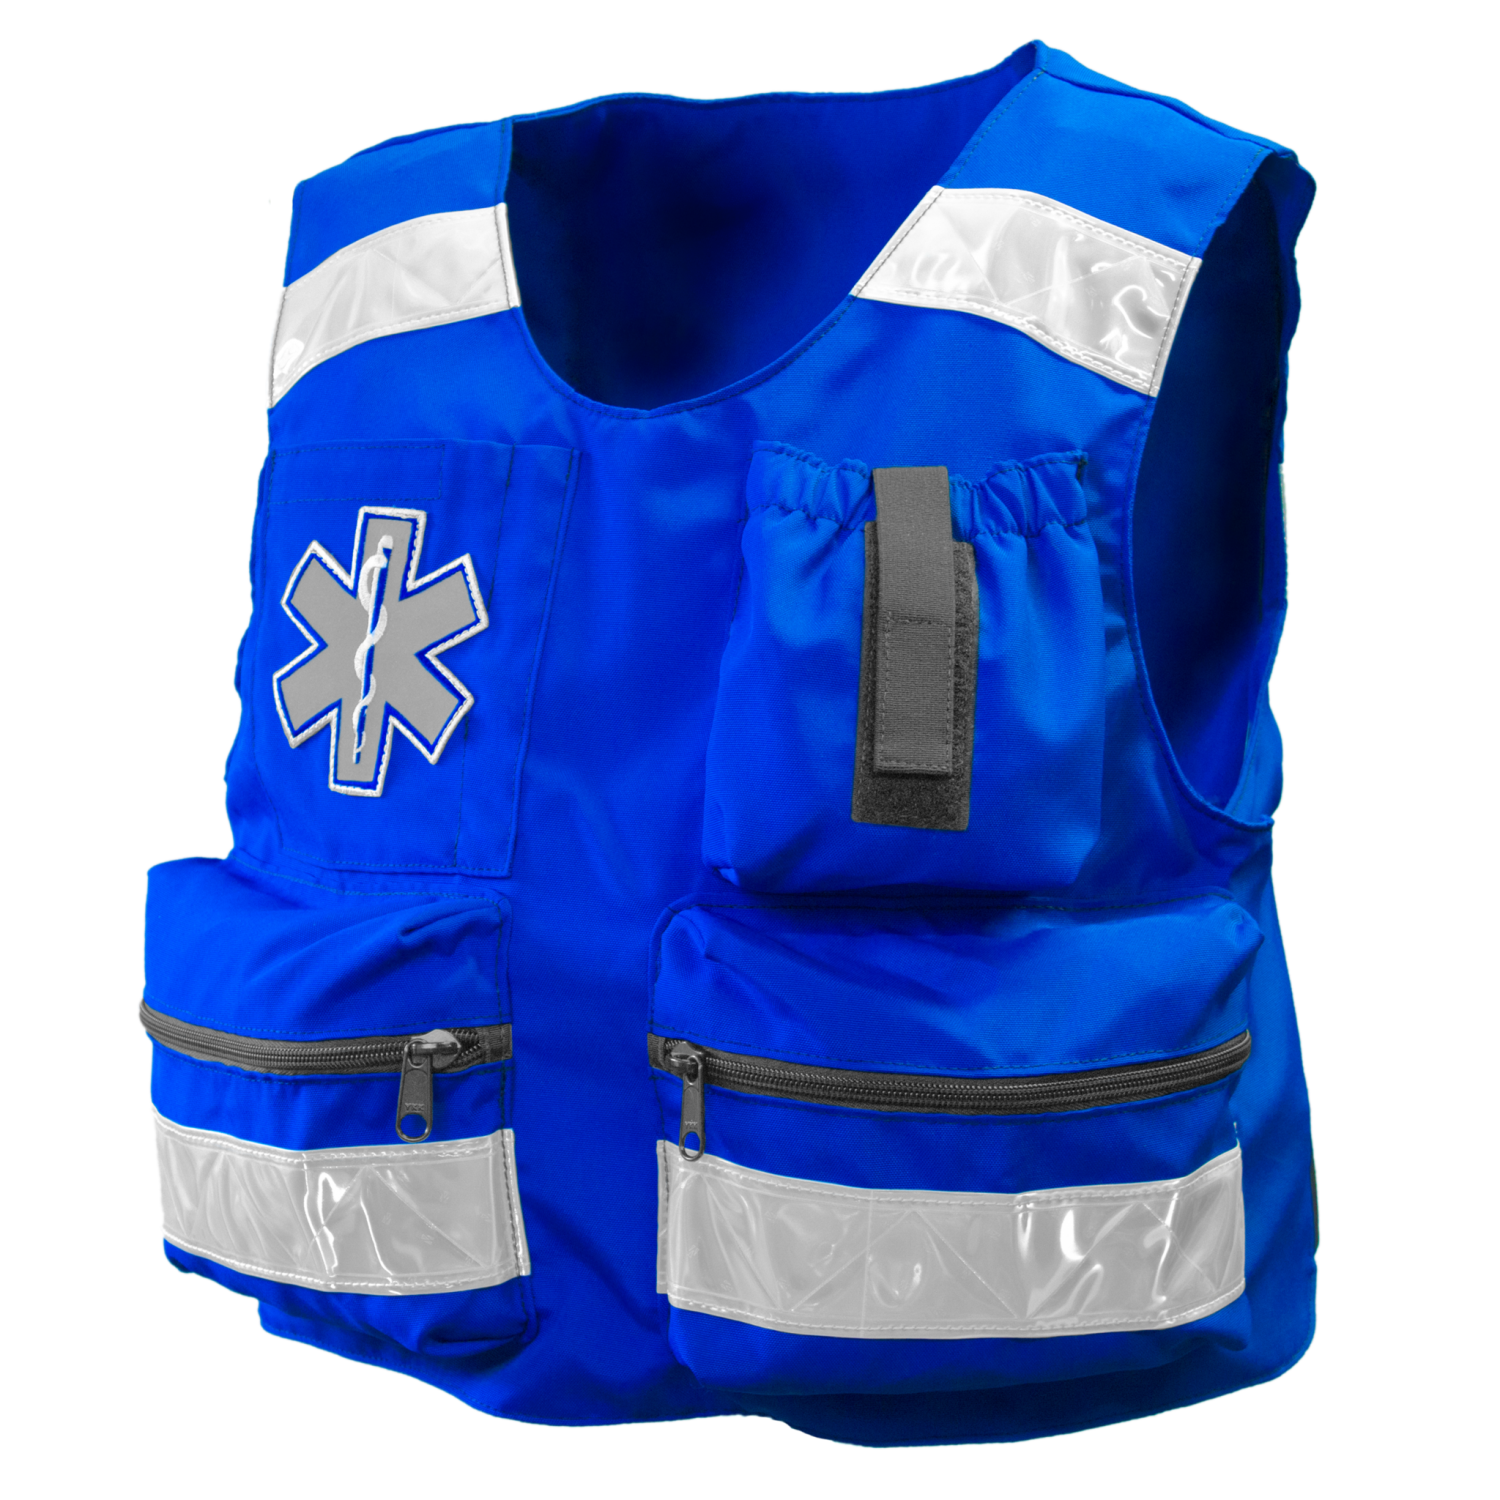 C5 – EMERGENCY RESPONSE CARRIER Custom Fit Body Armor for Fire and EMS ...